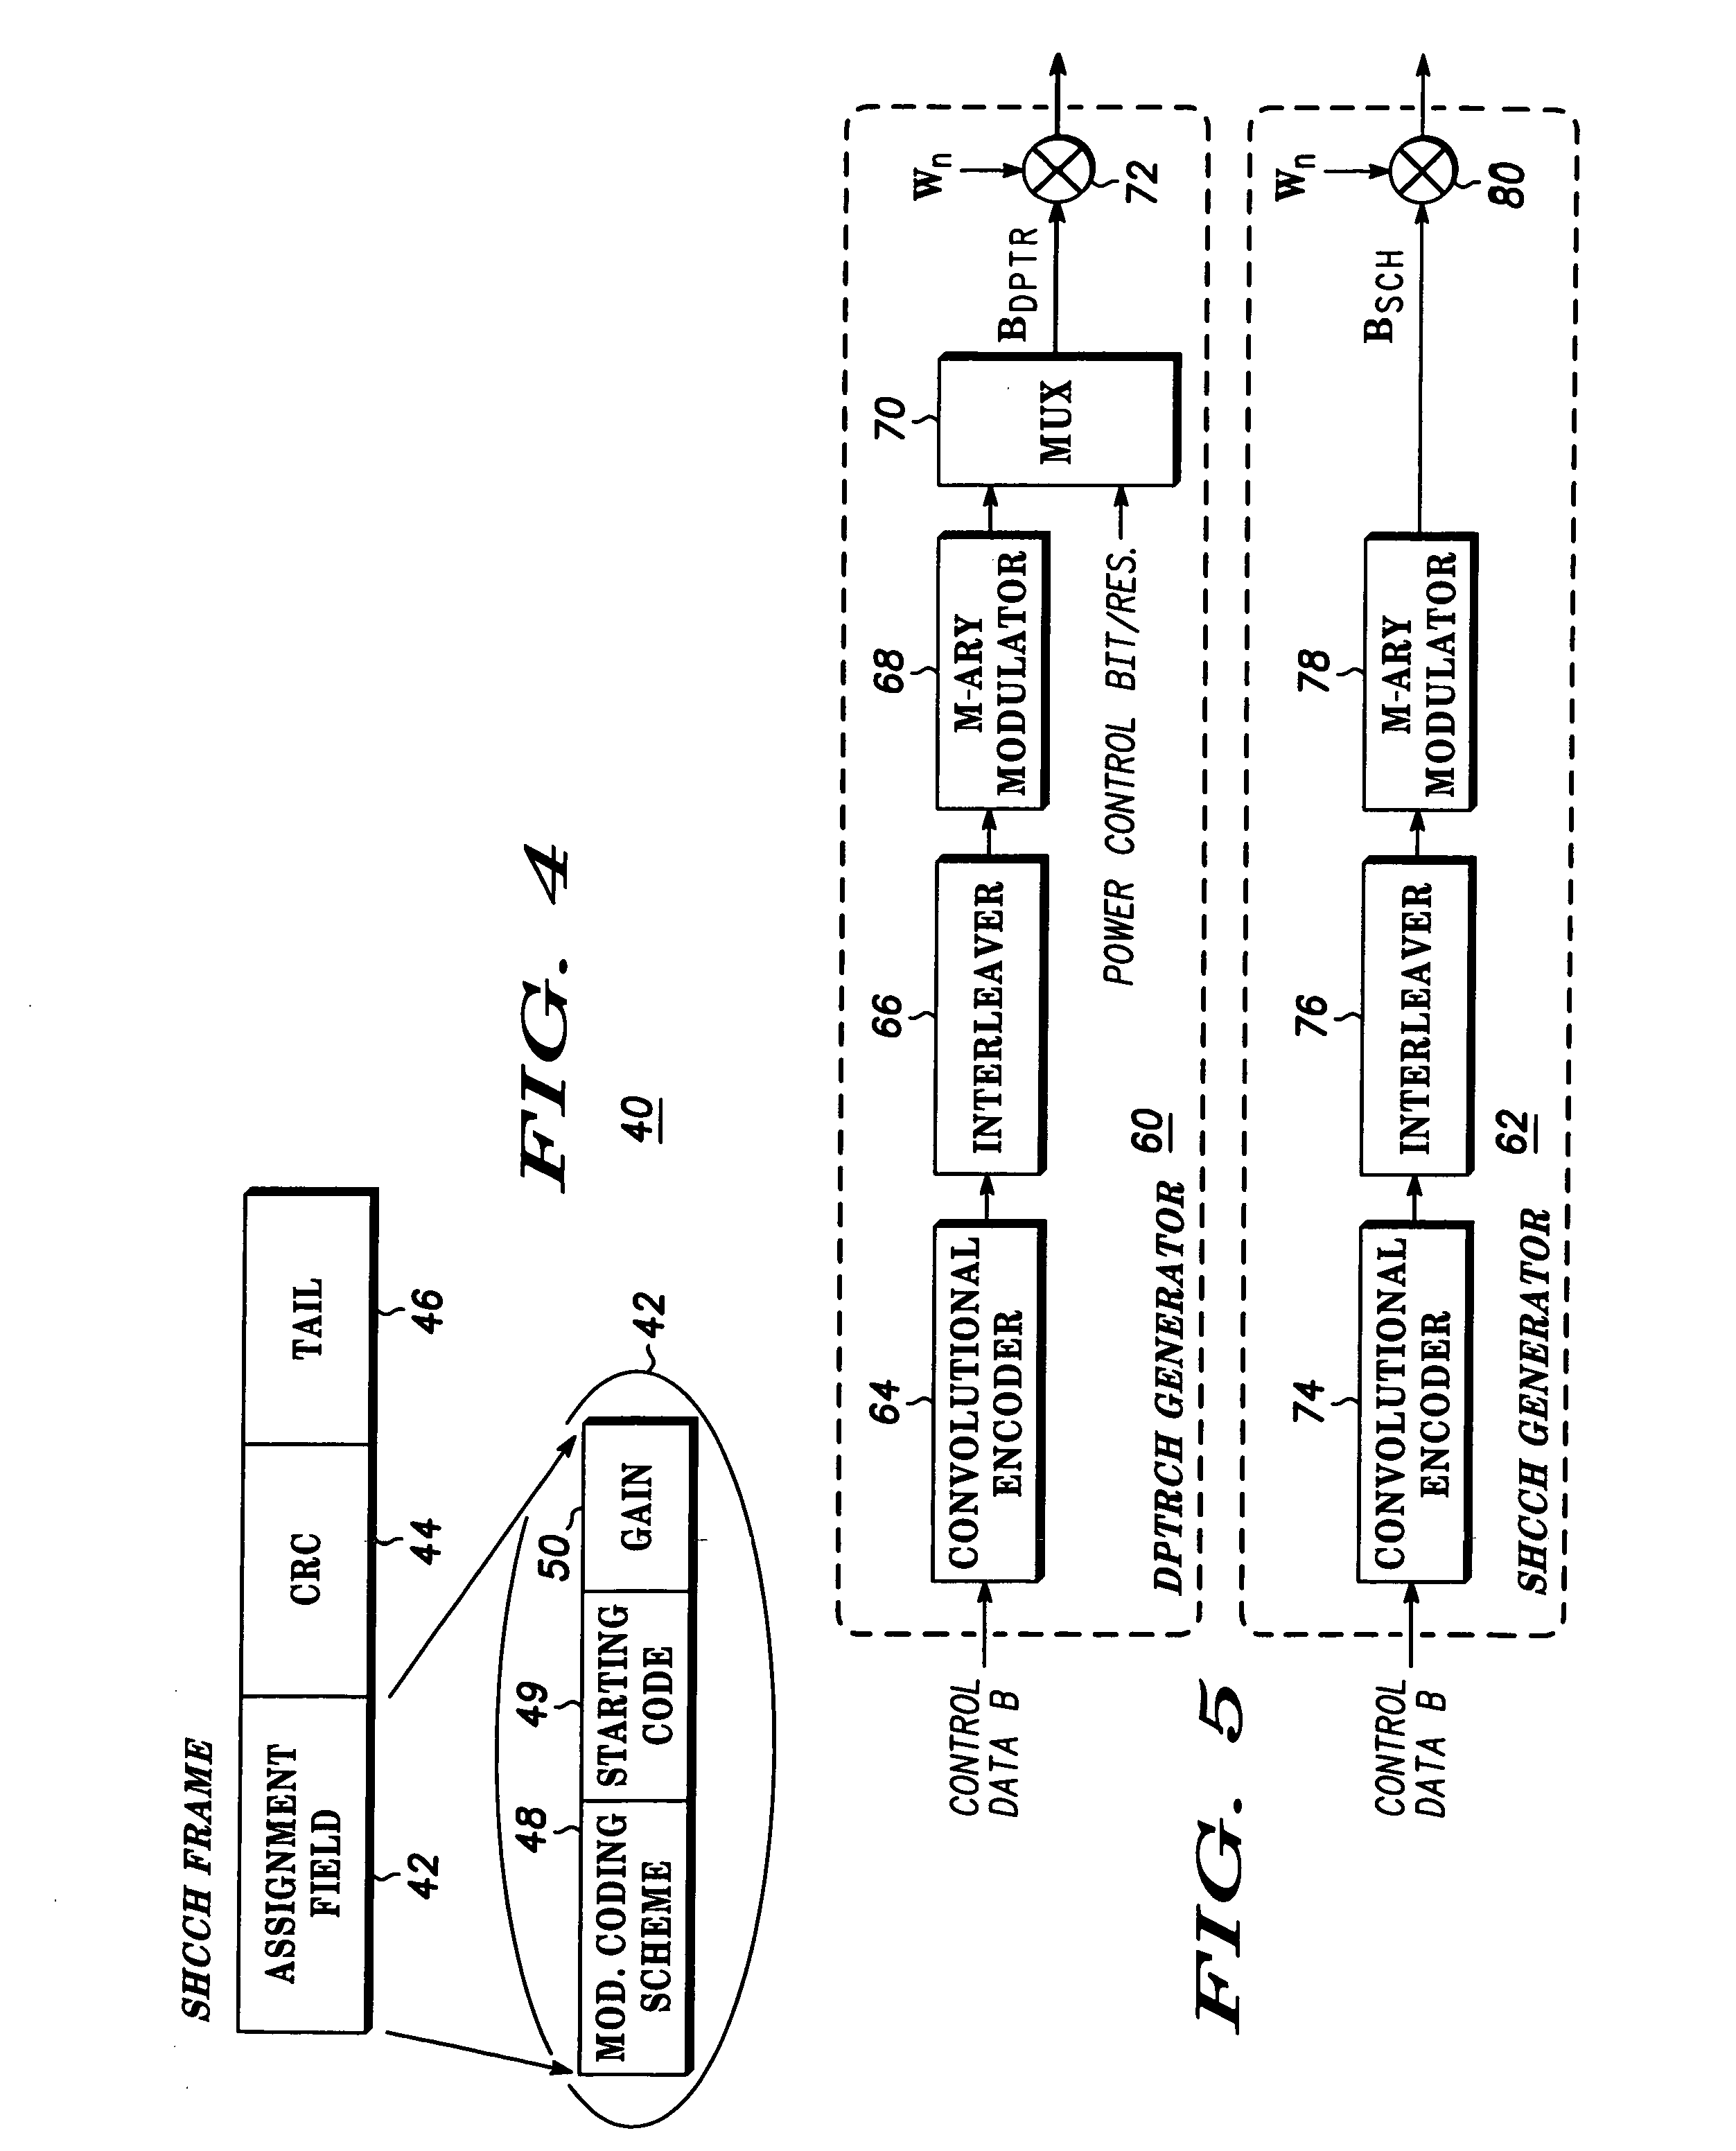 Apparatus and method for providing separate forward dedicated and shared control channels in a communications system